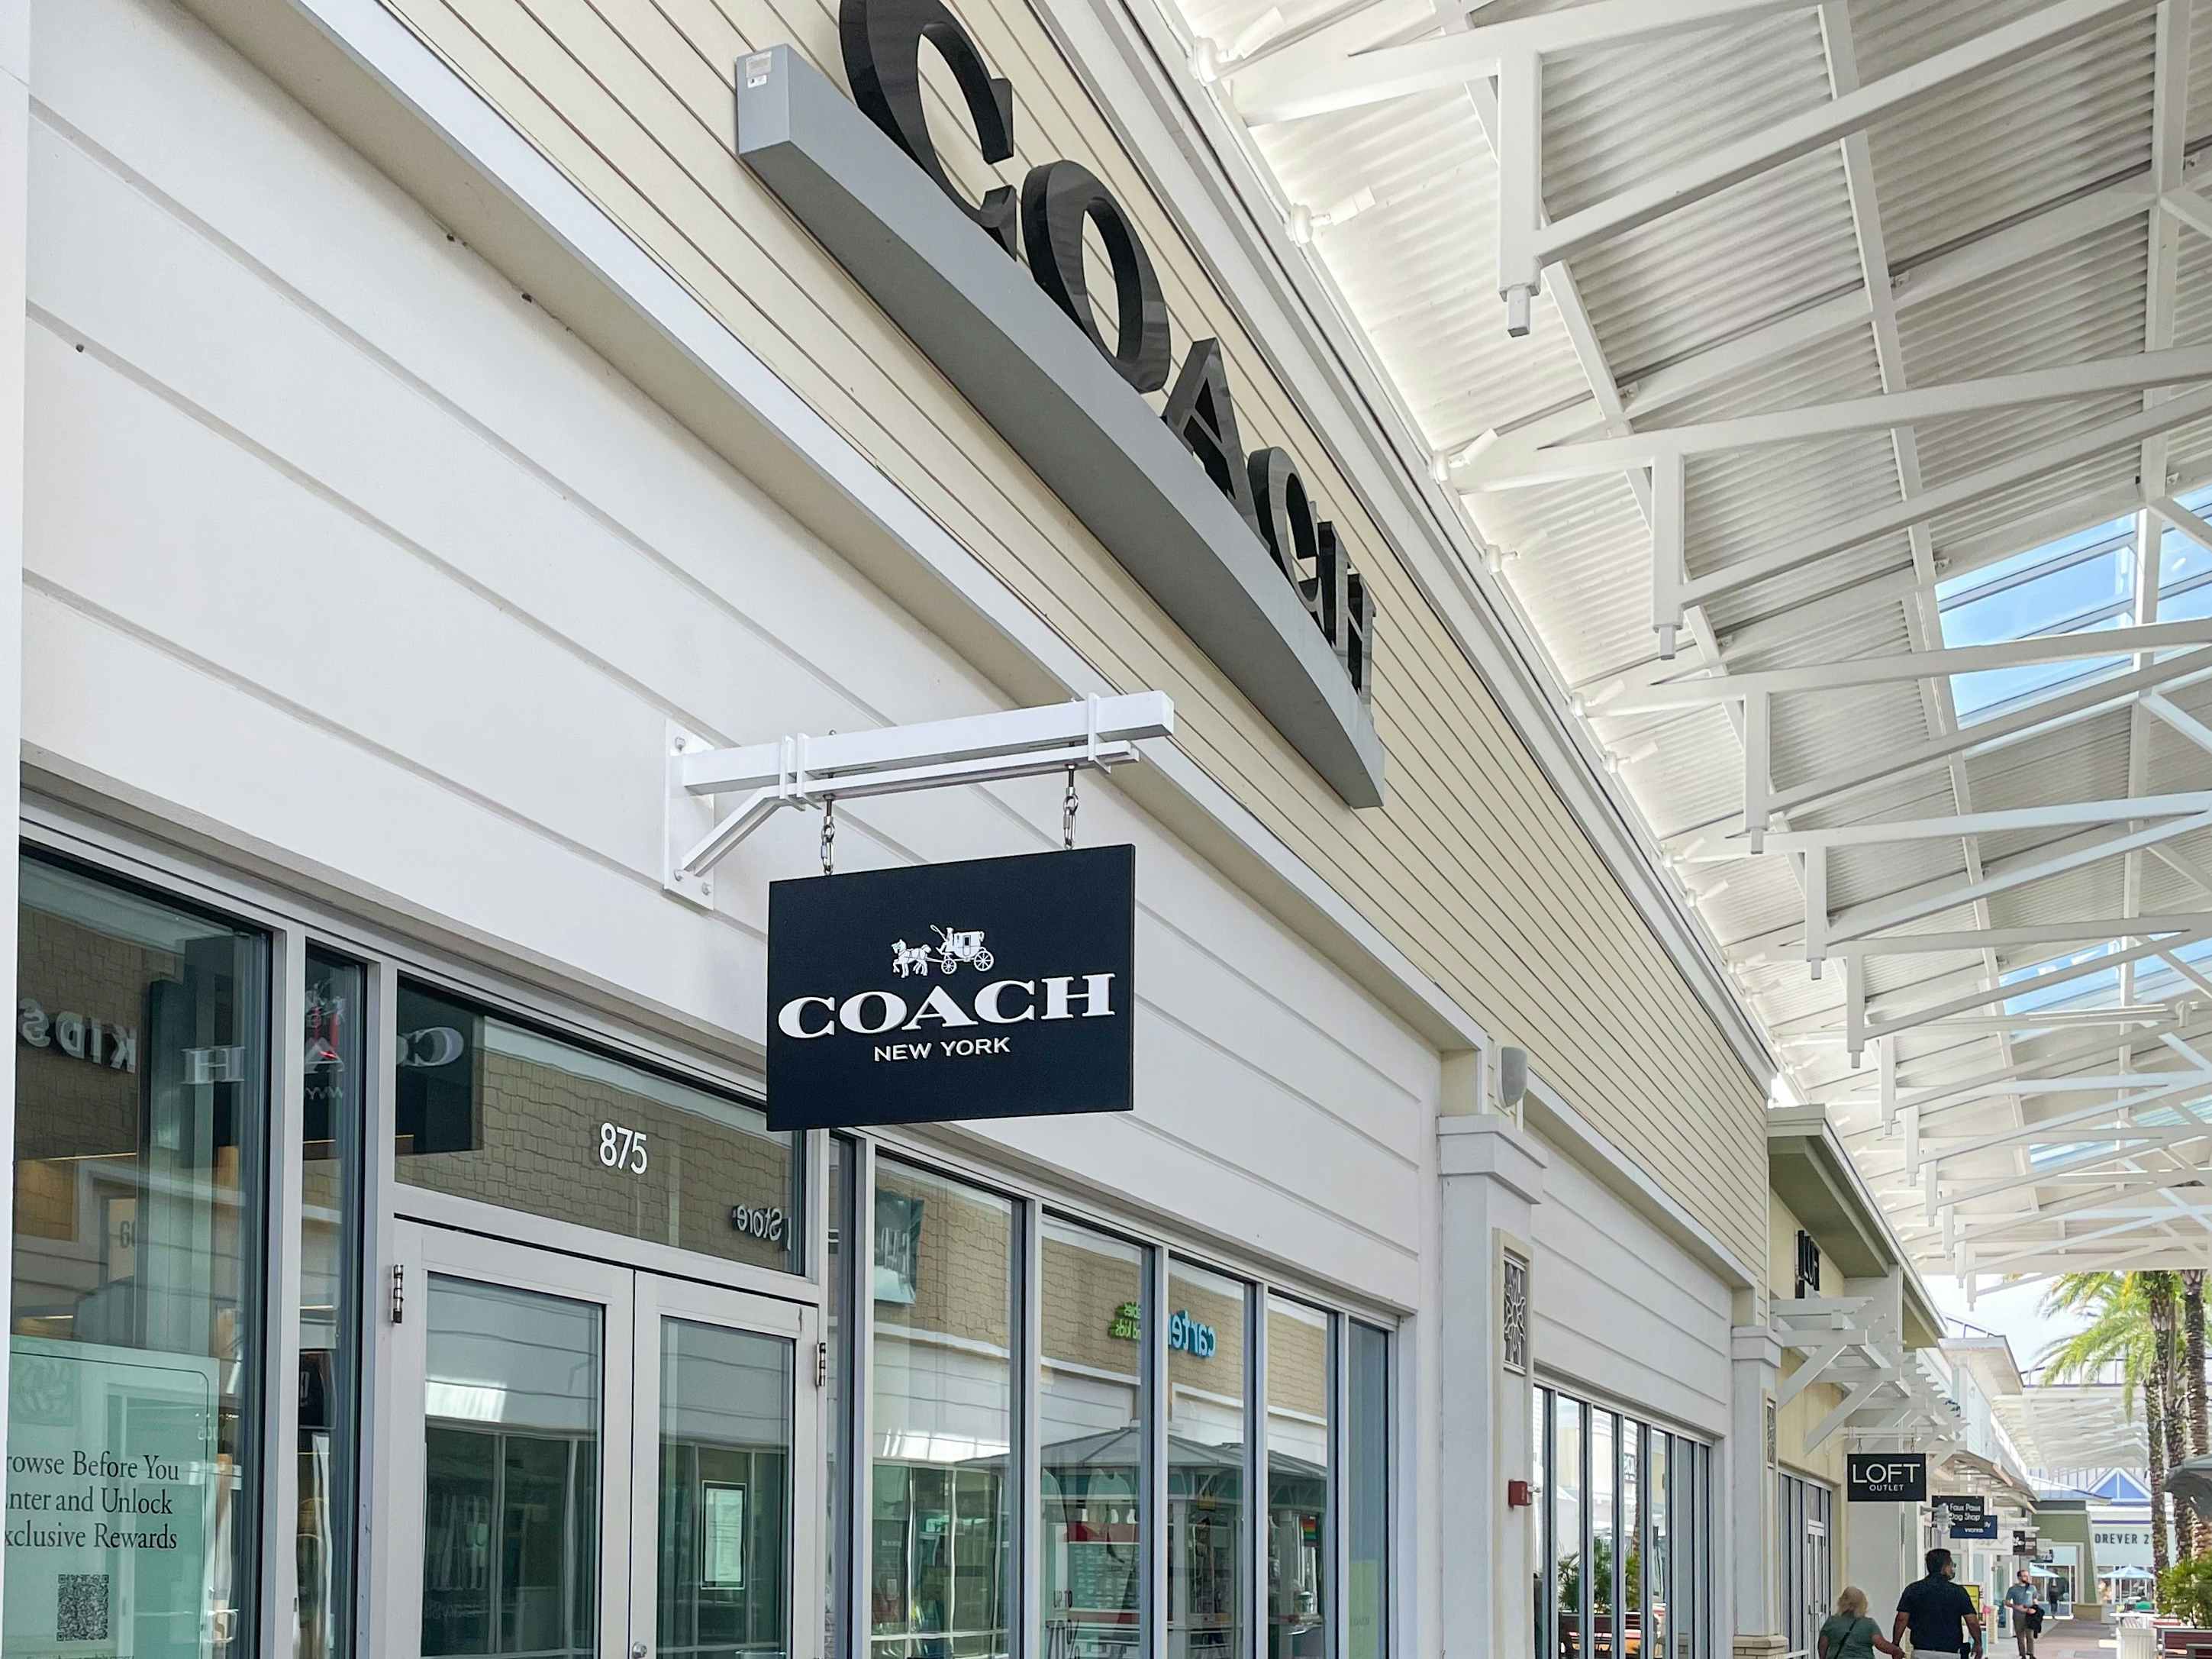 Coach Outlet is offering 75% off clearance items this week 